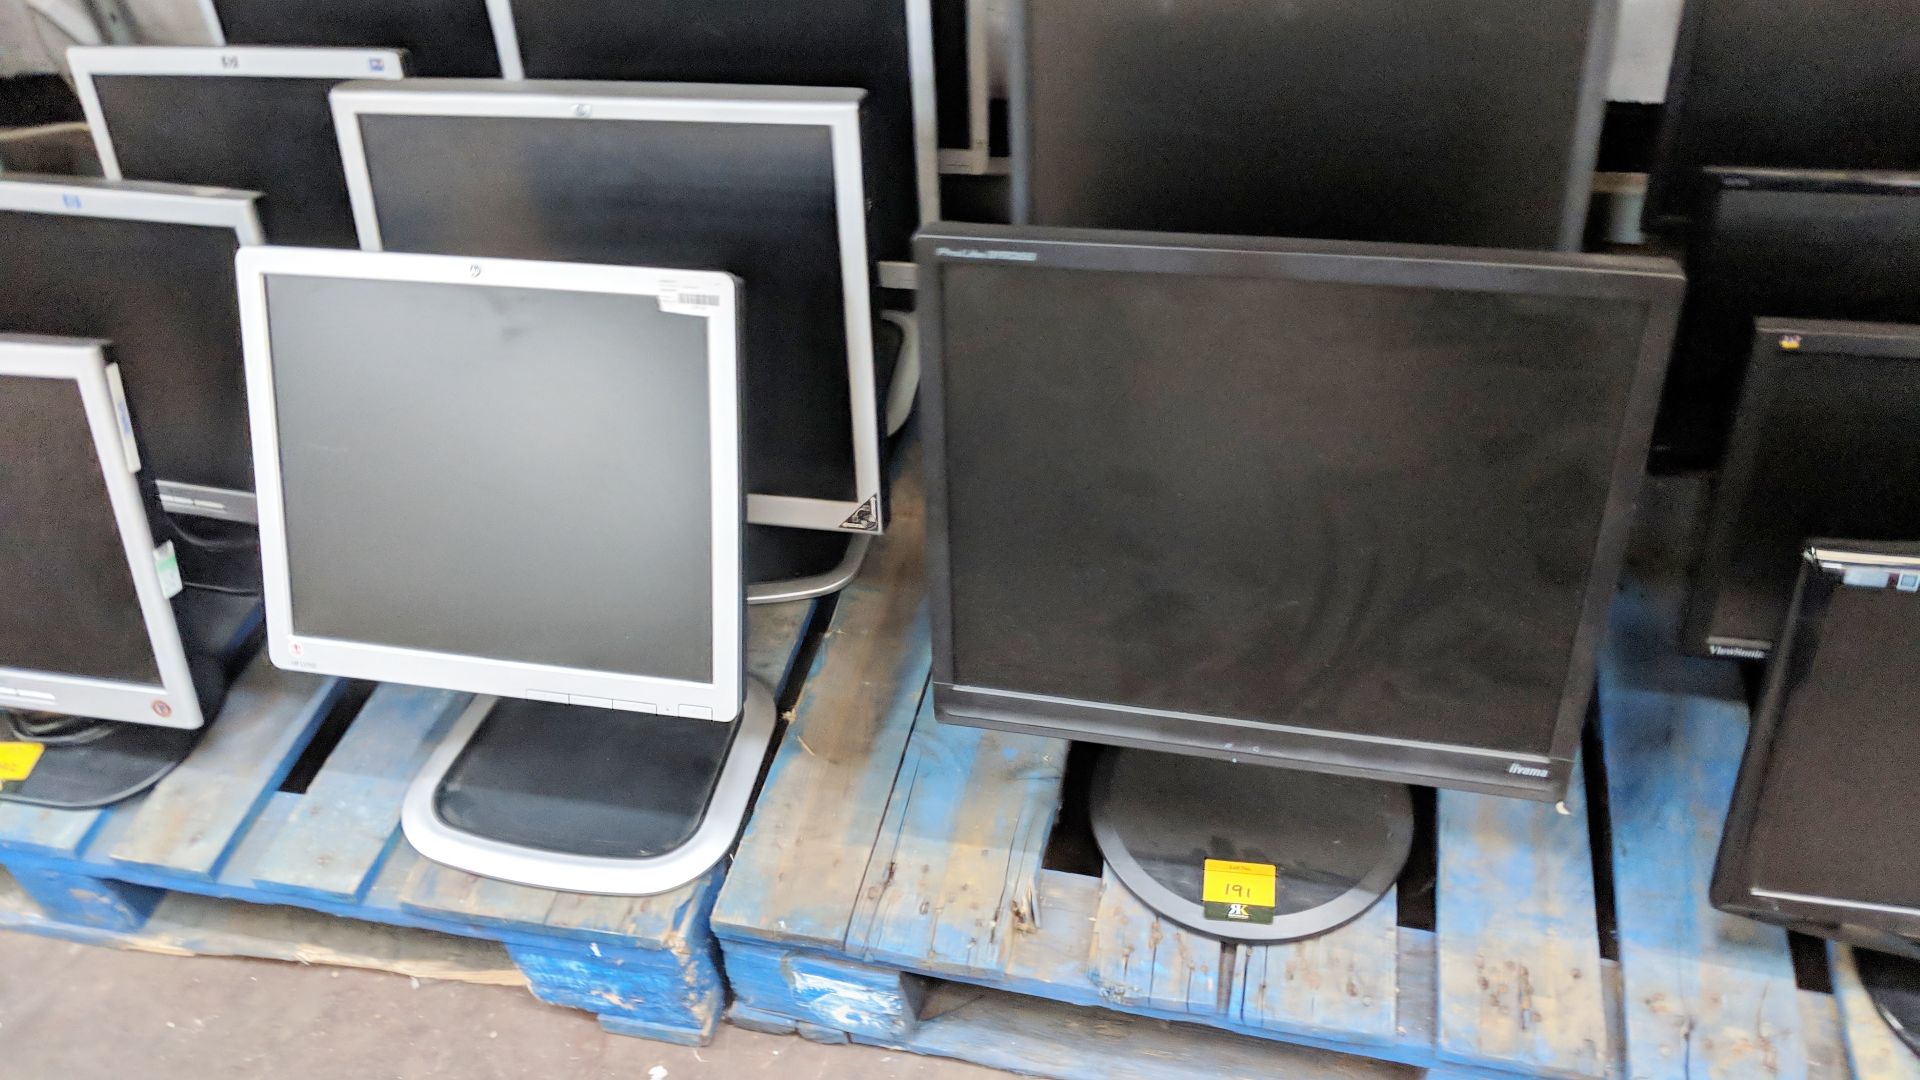 7 off Prolite & HP mostly 19" LCD monitors IMPORTANT: Please remember goods successfully bid upon - Image 2 of 5